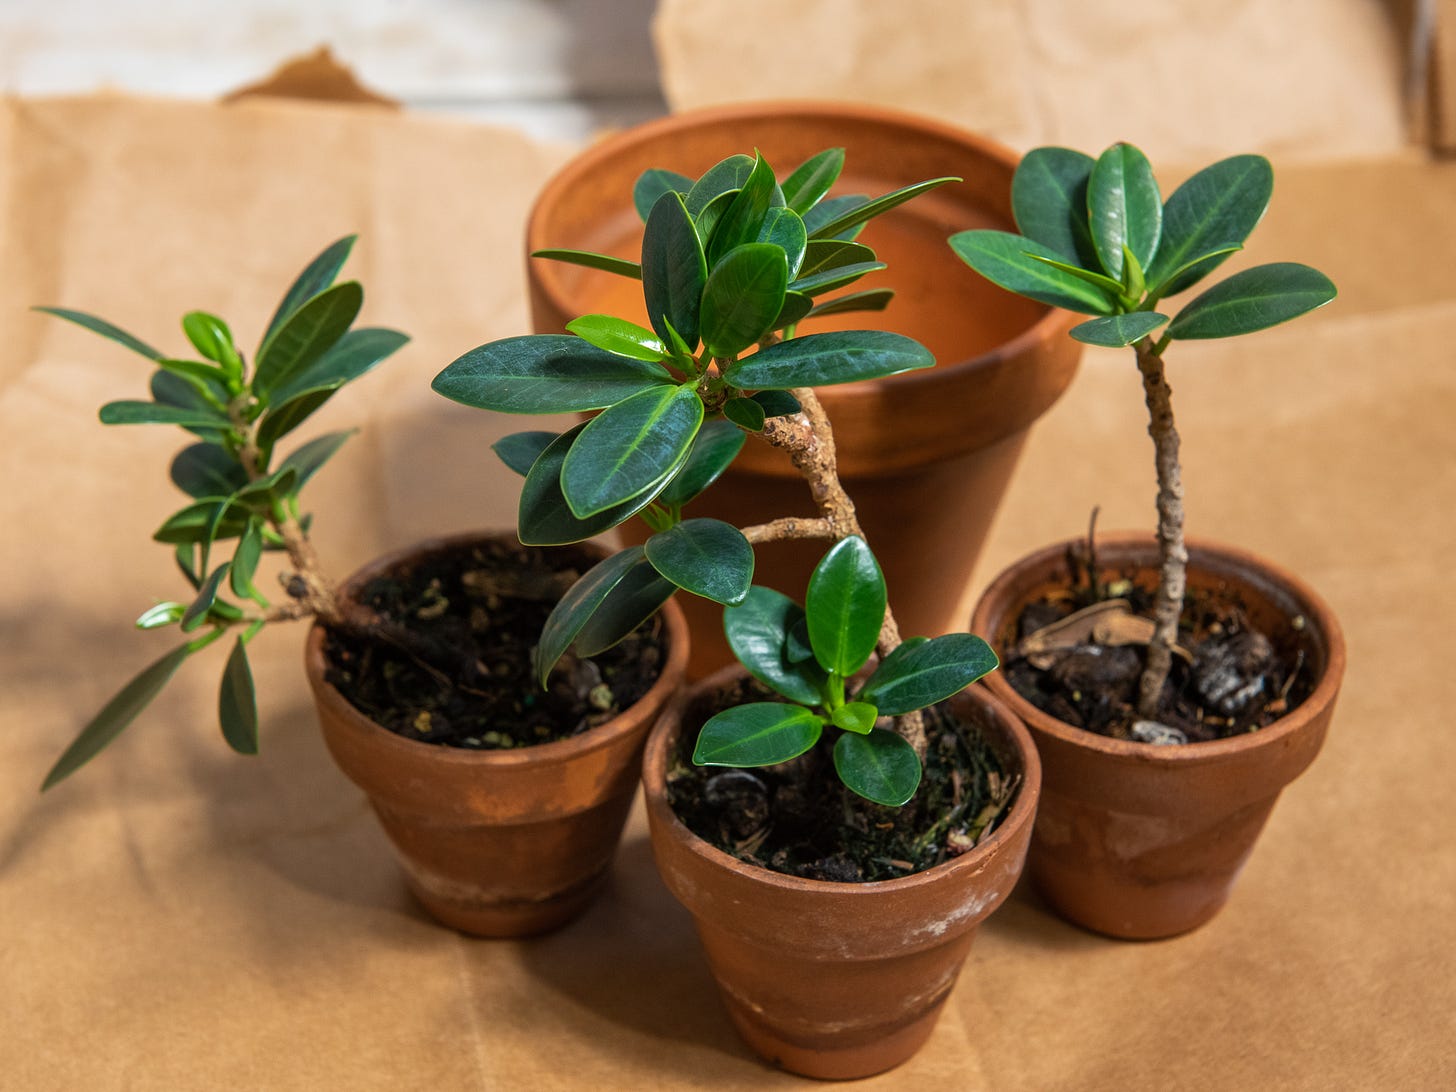 ID: Three small 2-inch pots containing one ficus cutting each on brown paper